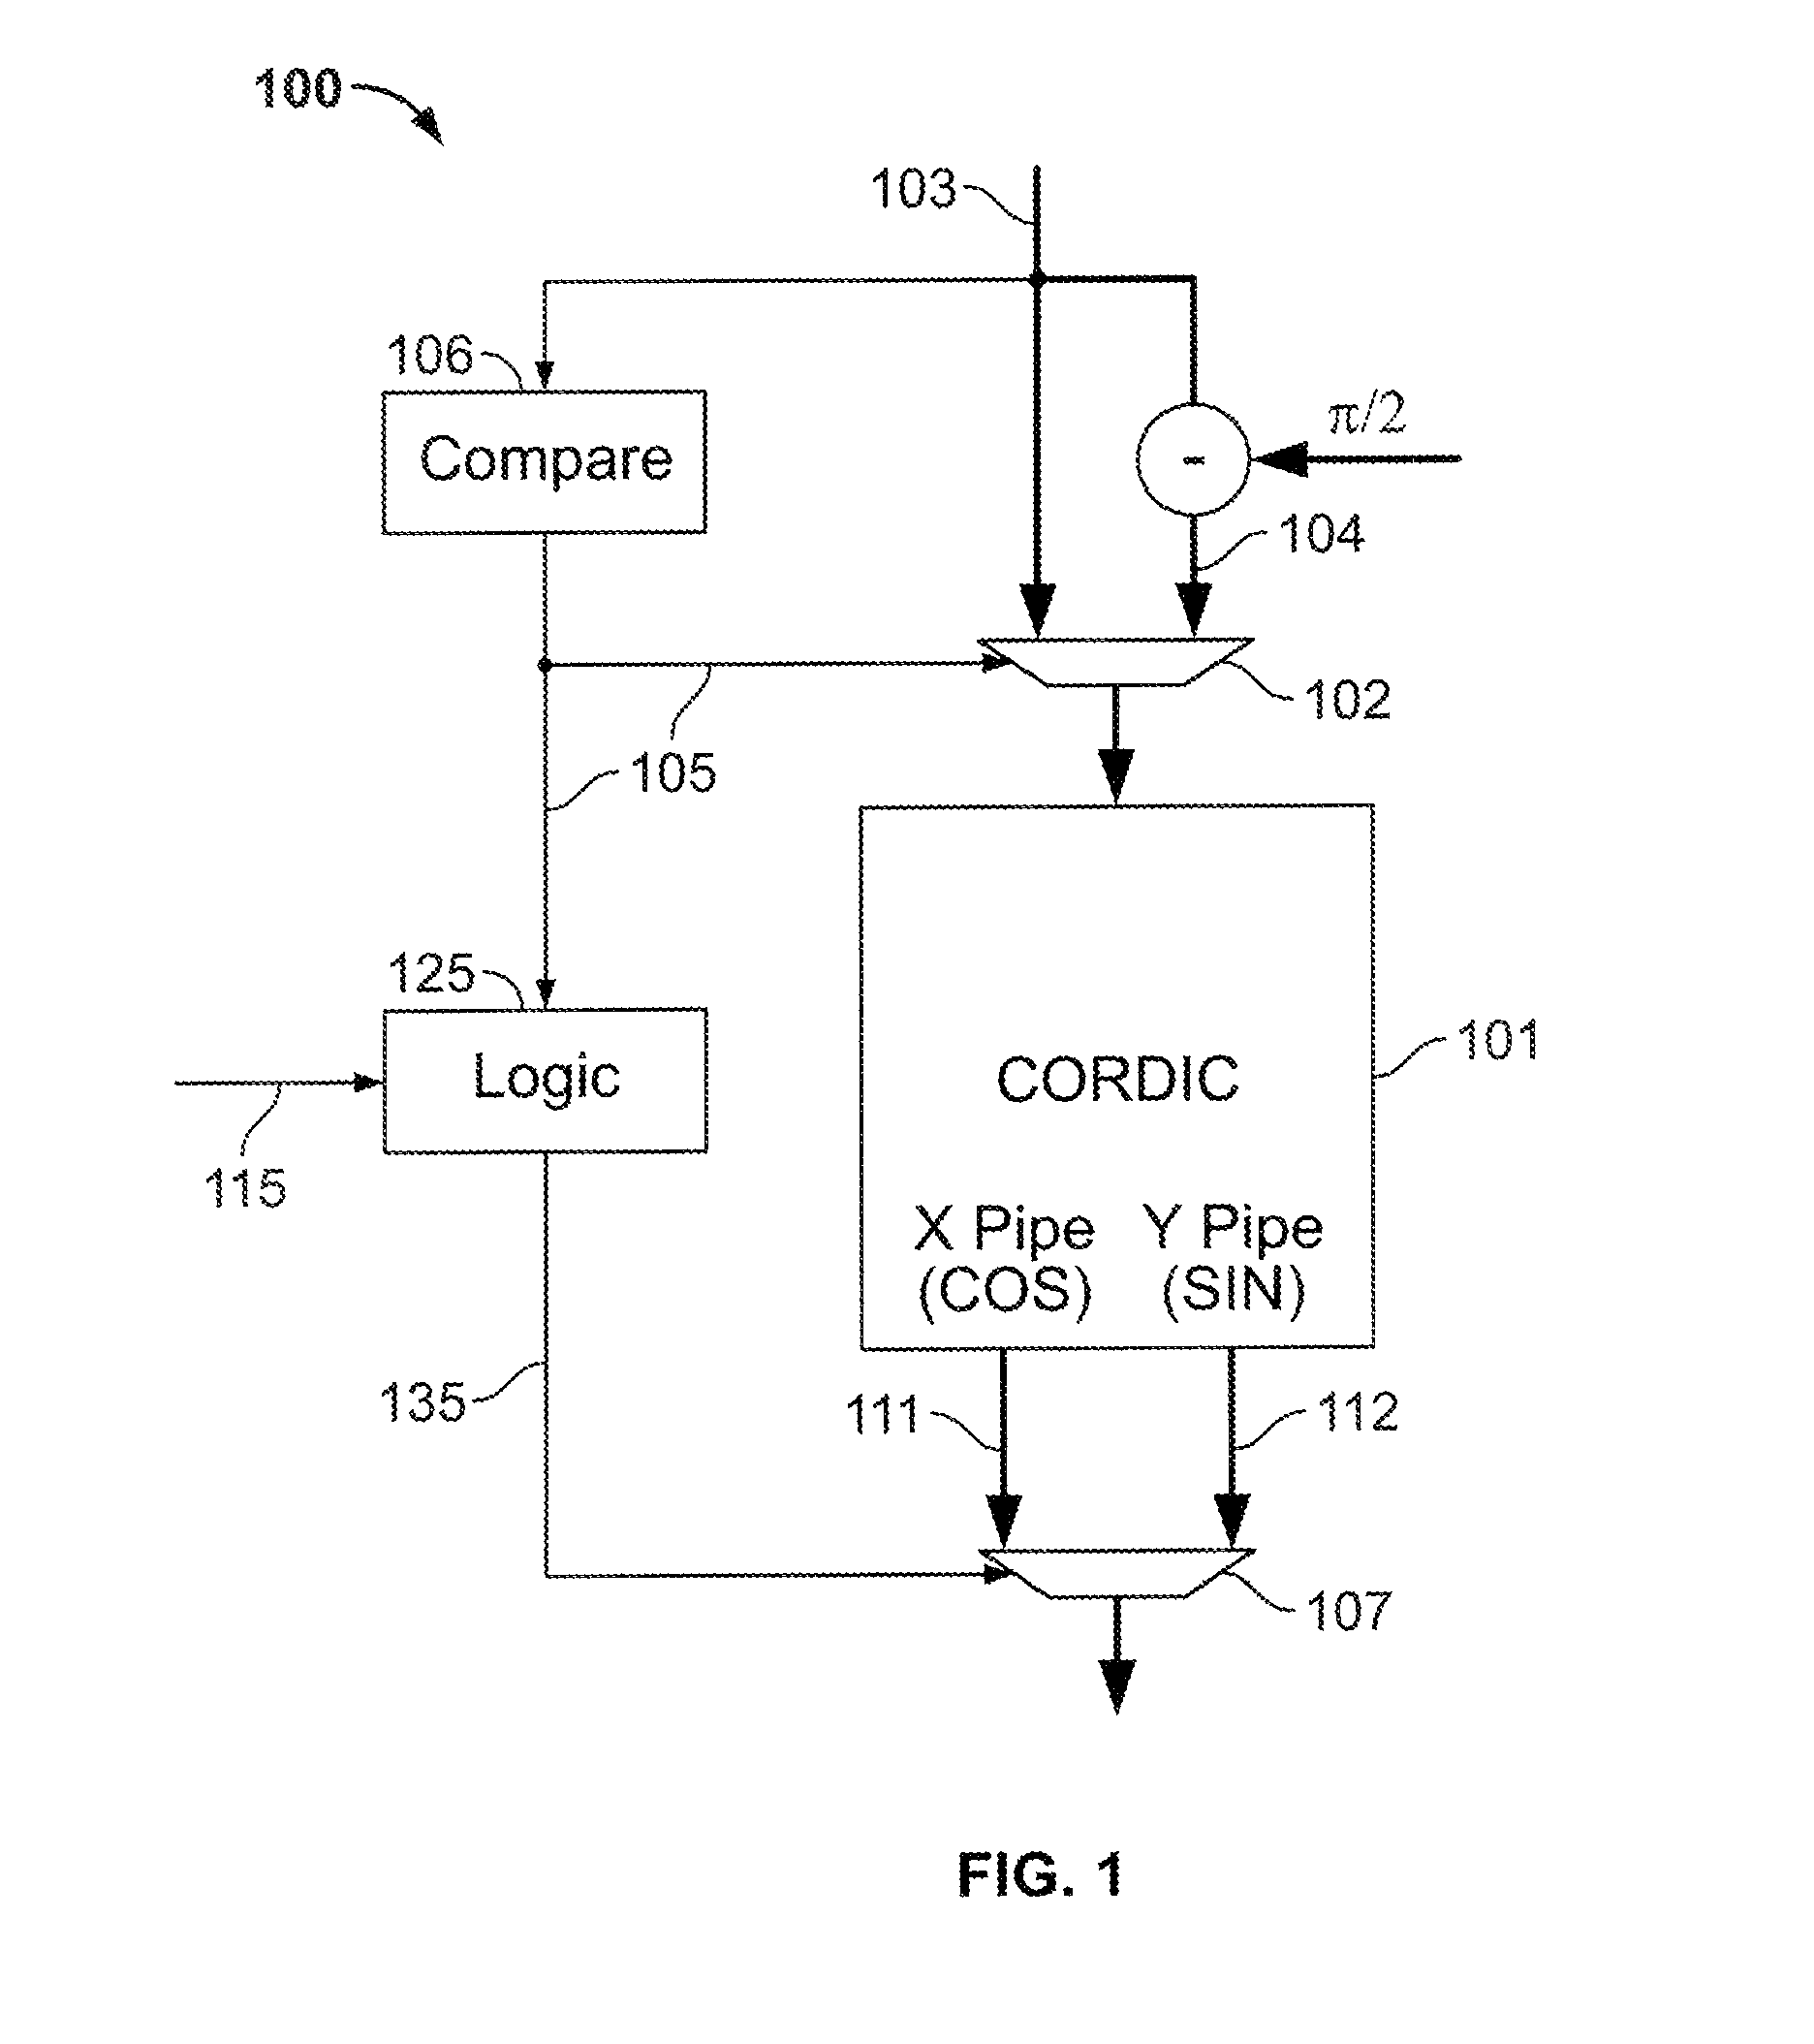 Calculation of trigonometric functions in an integrated circuit device